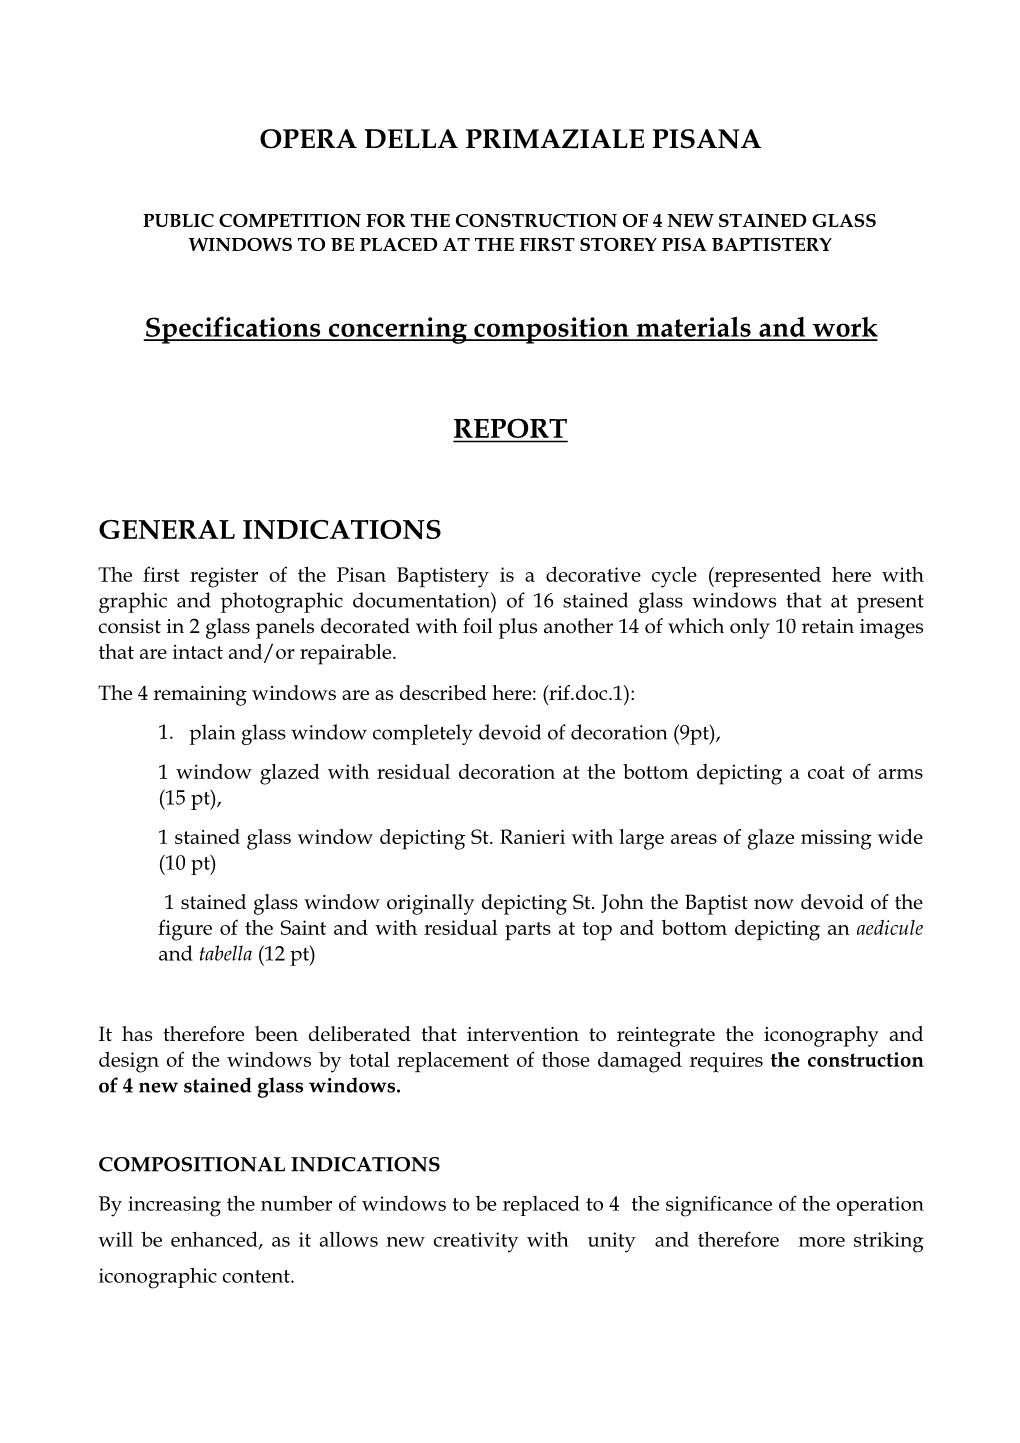 Doc.2 Specifications for Materials and Works